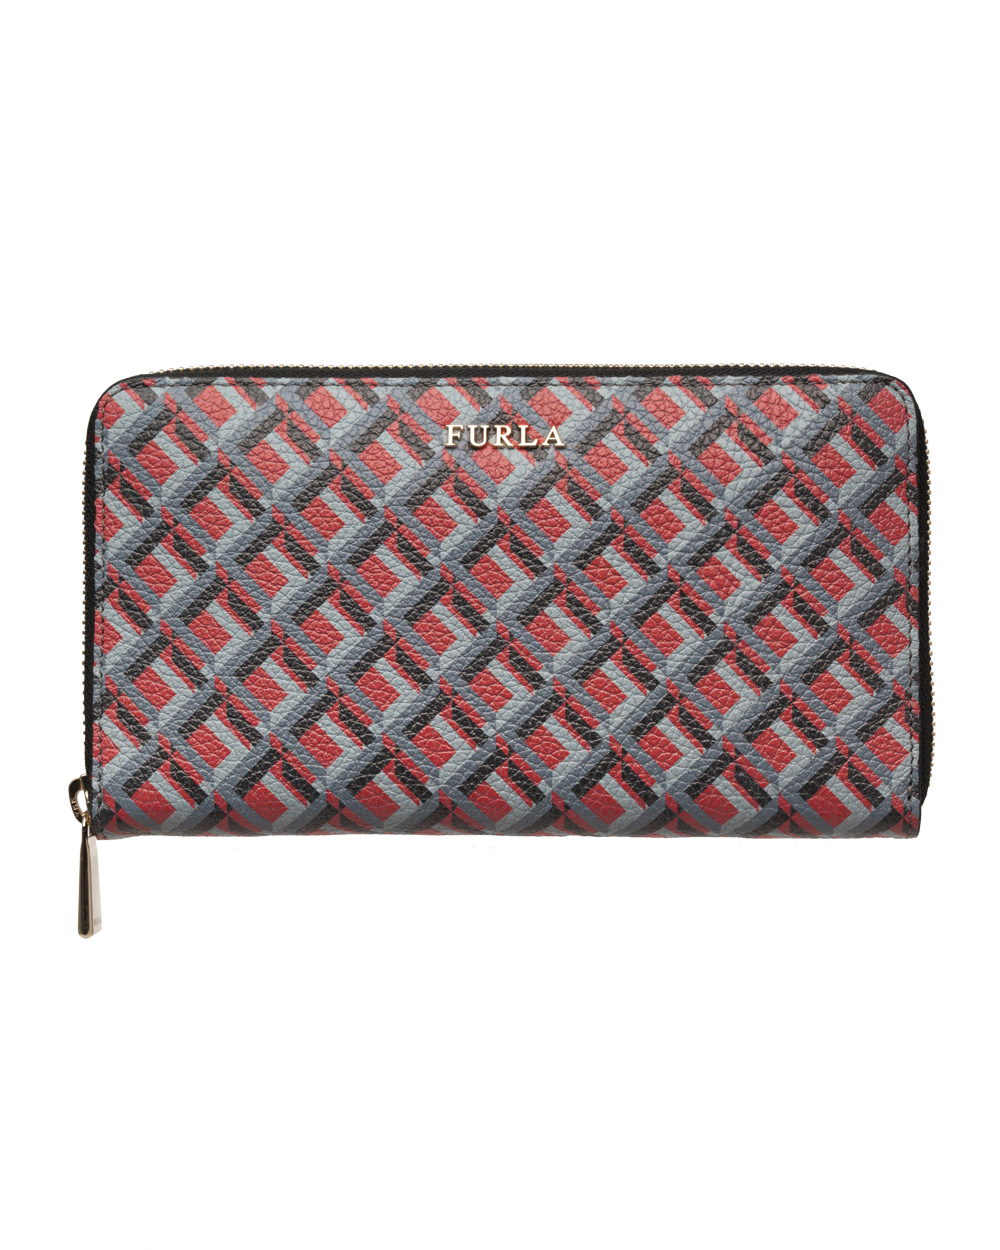 Furla wallet, $371, from T Galleria by DFS